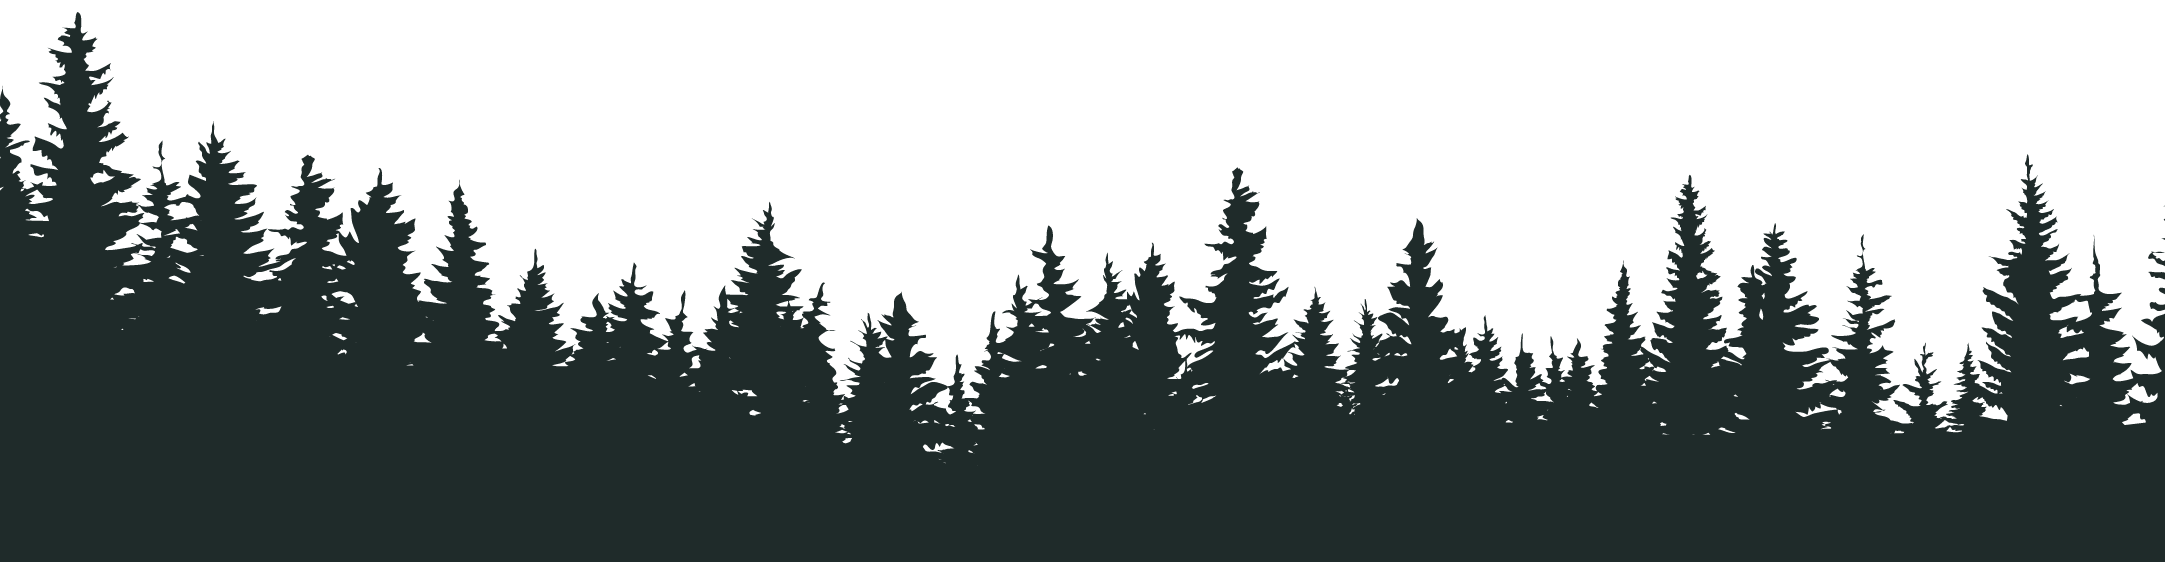 silhouette of forest trees